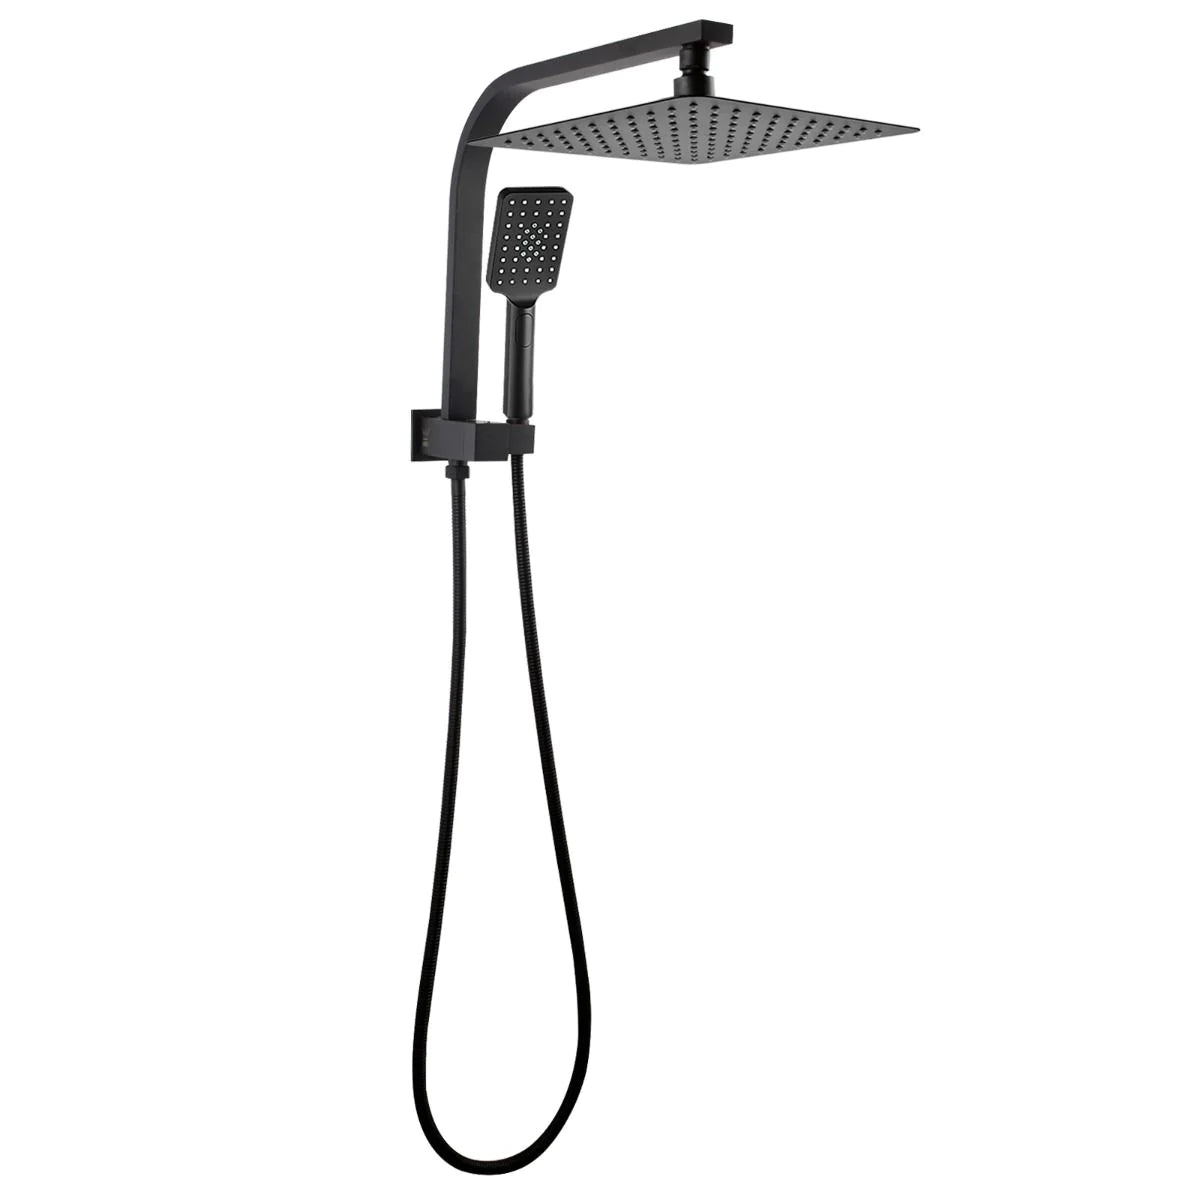 Square Shower Station with Top Water Inlet, Minimalist and Modern-Black-OX2140-SH-N+OX0002-SH+OX-S8-HHS